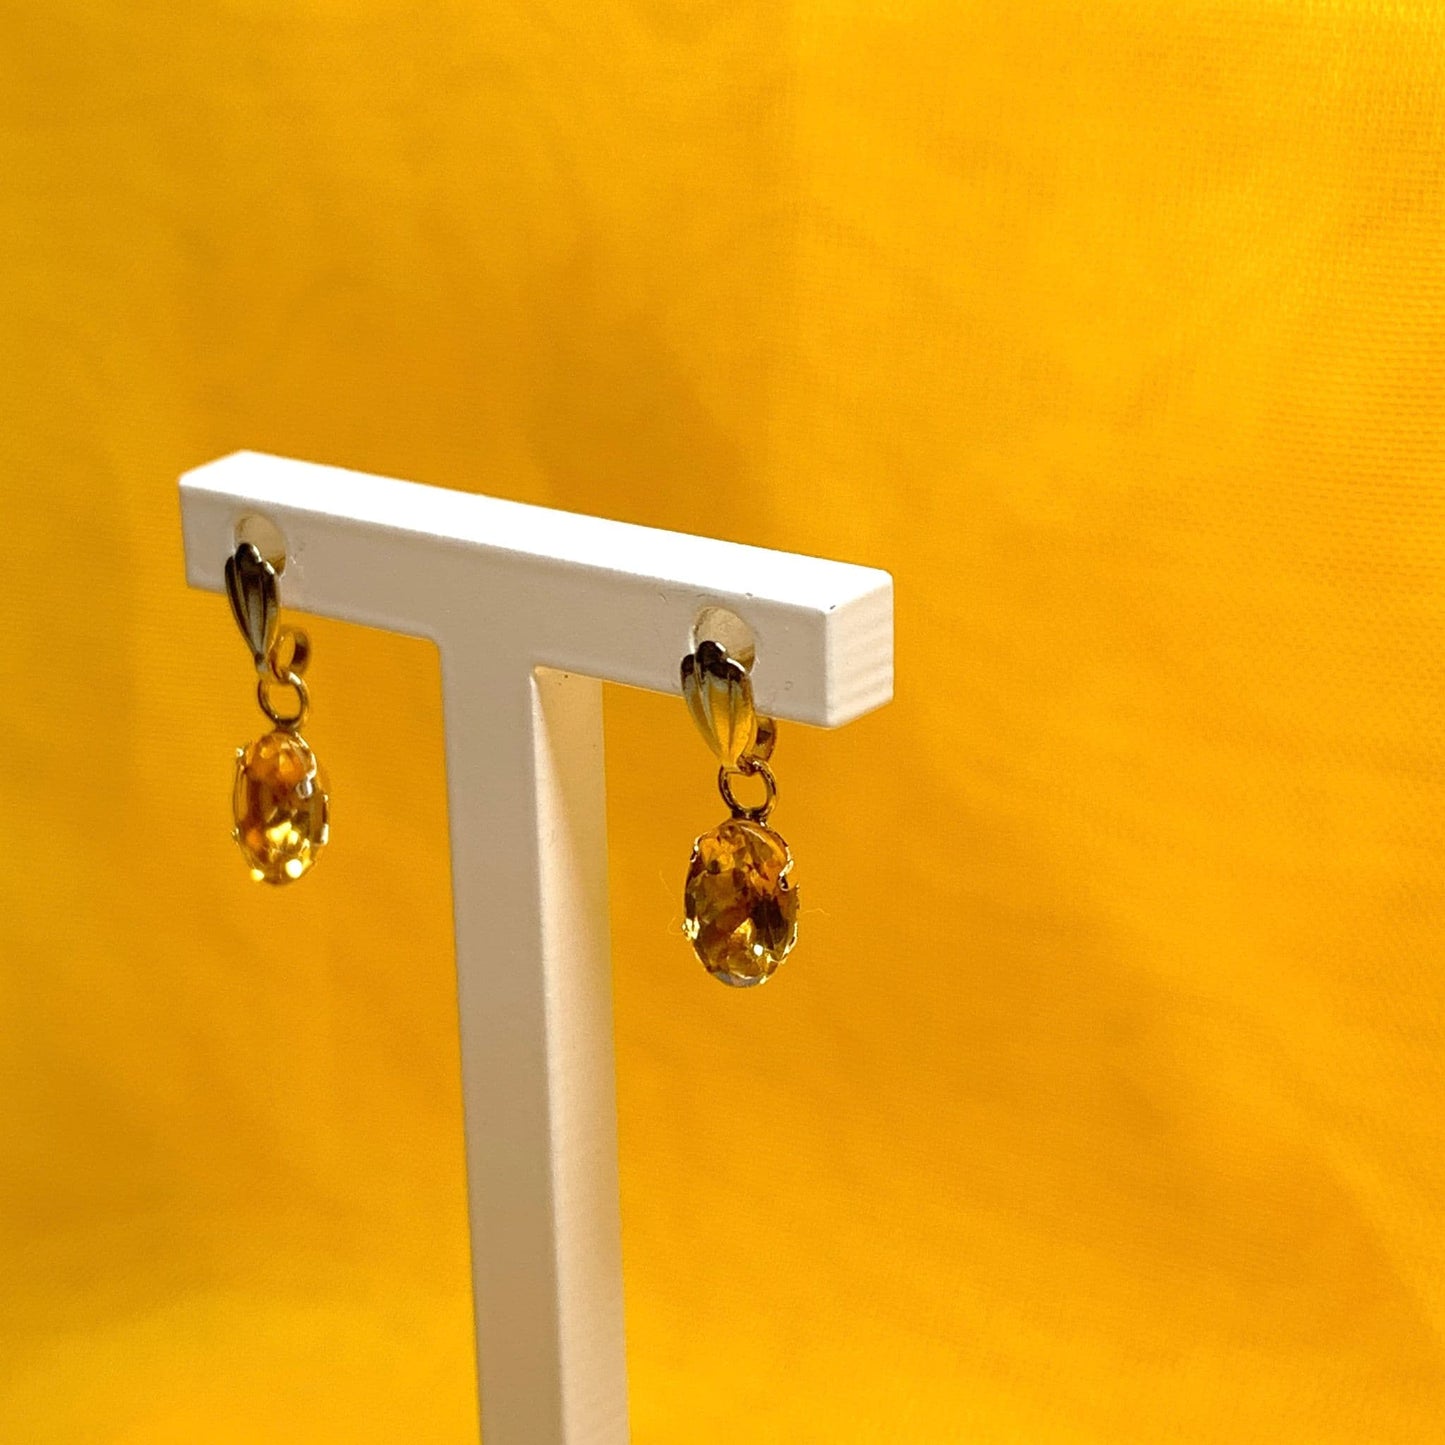 Oval shaped citrine yellow gold earrings